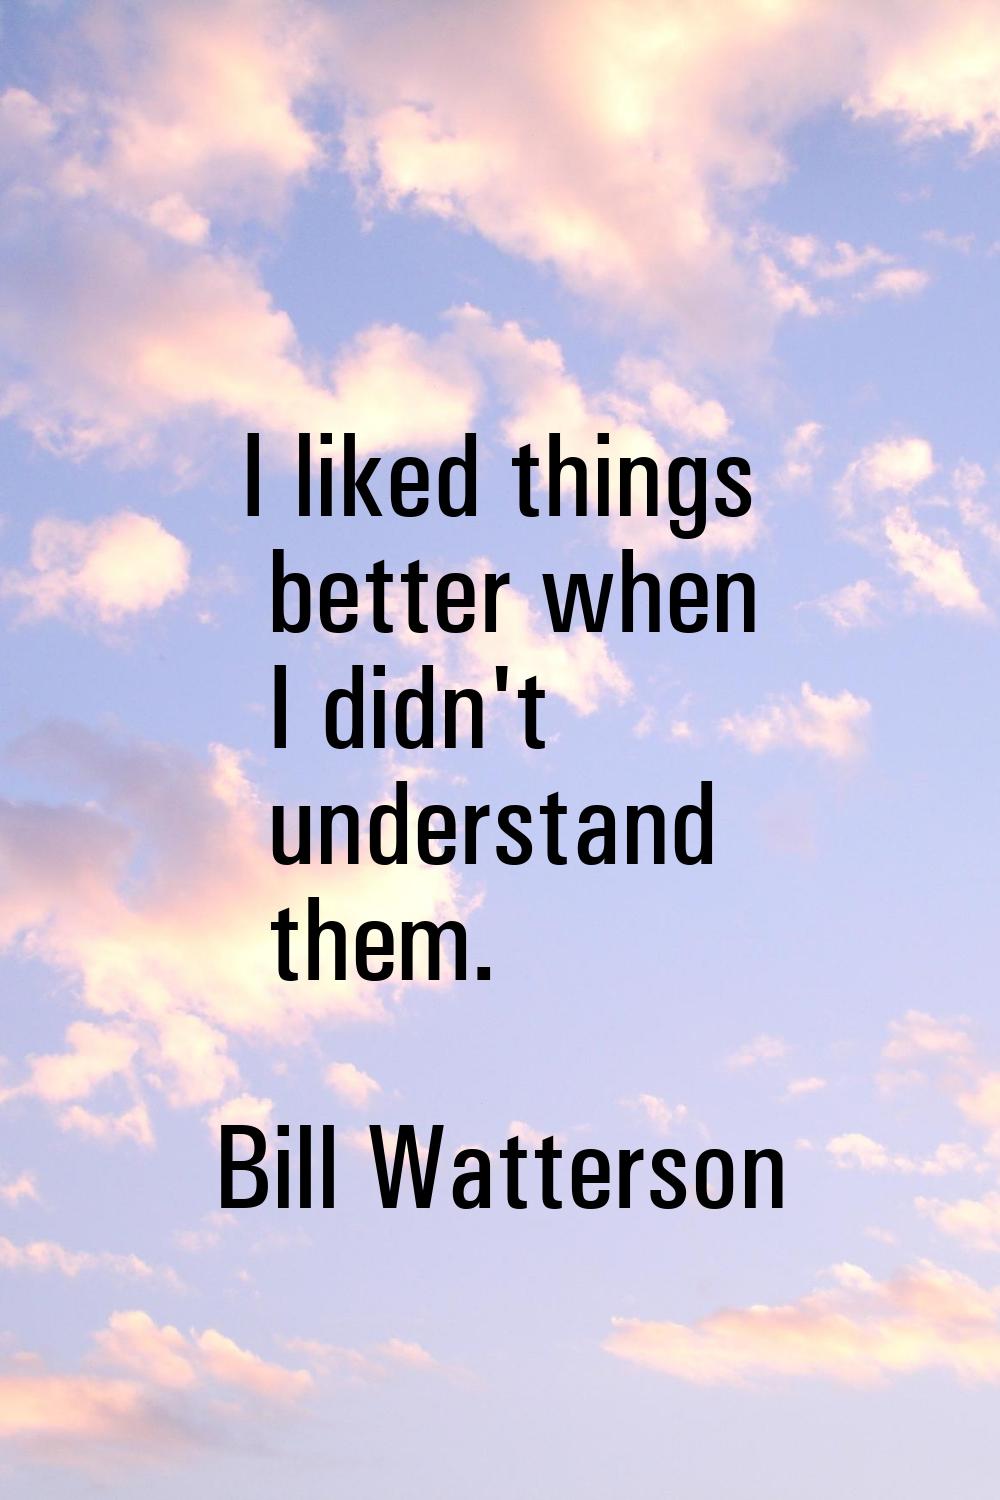 I liked things better when I didn't understand them.